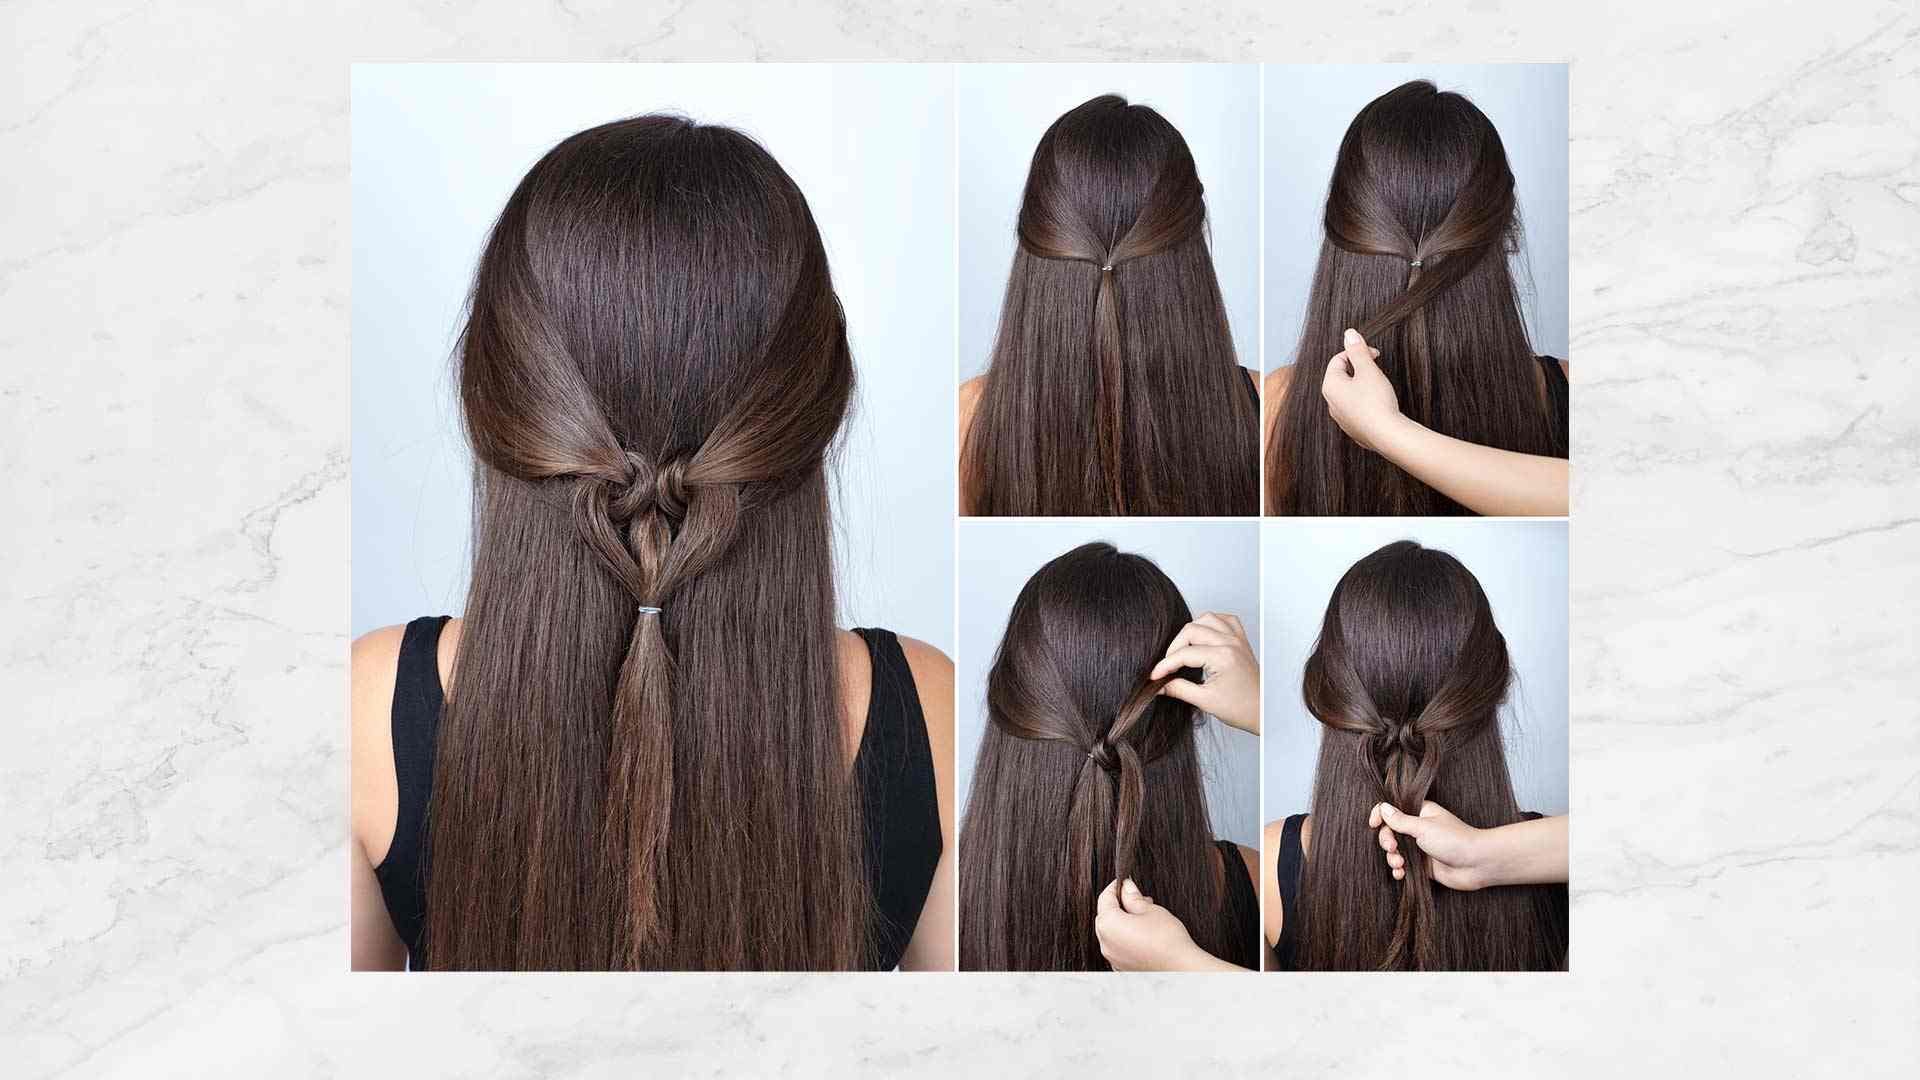 25 Easy Hairstyles for 2022 - Lazy-Girl Hair Ideas to Copy